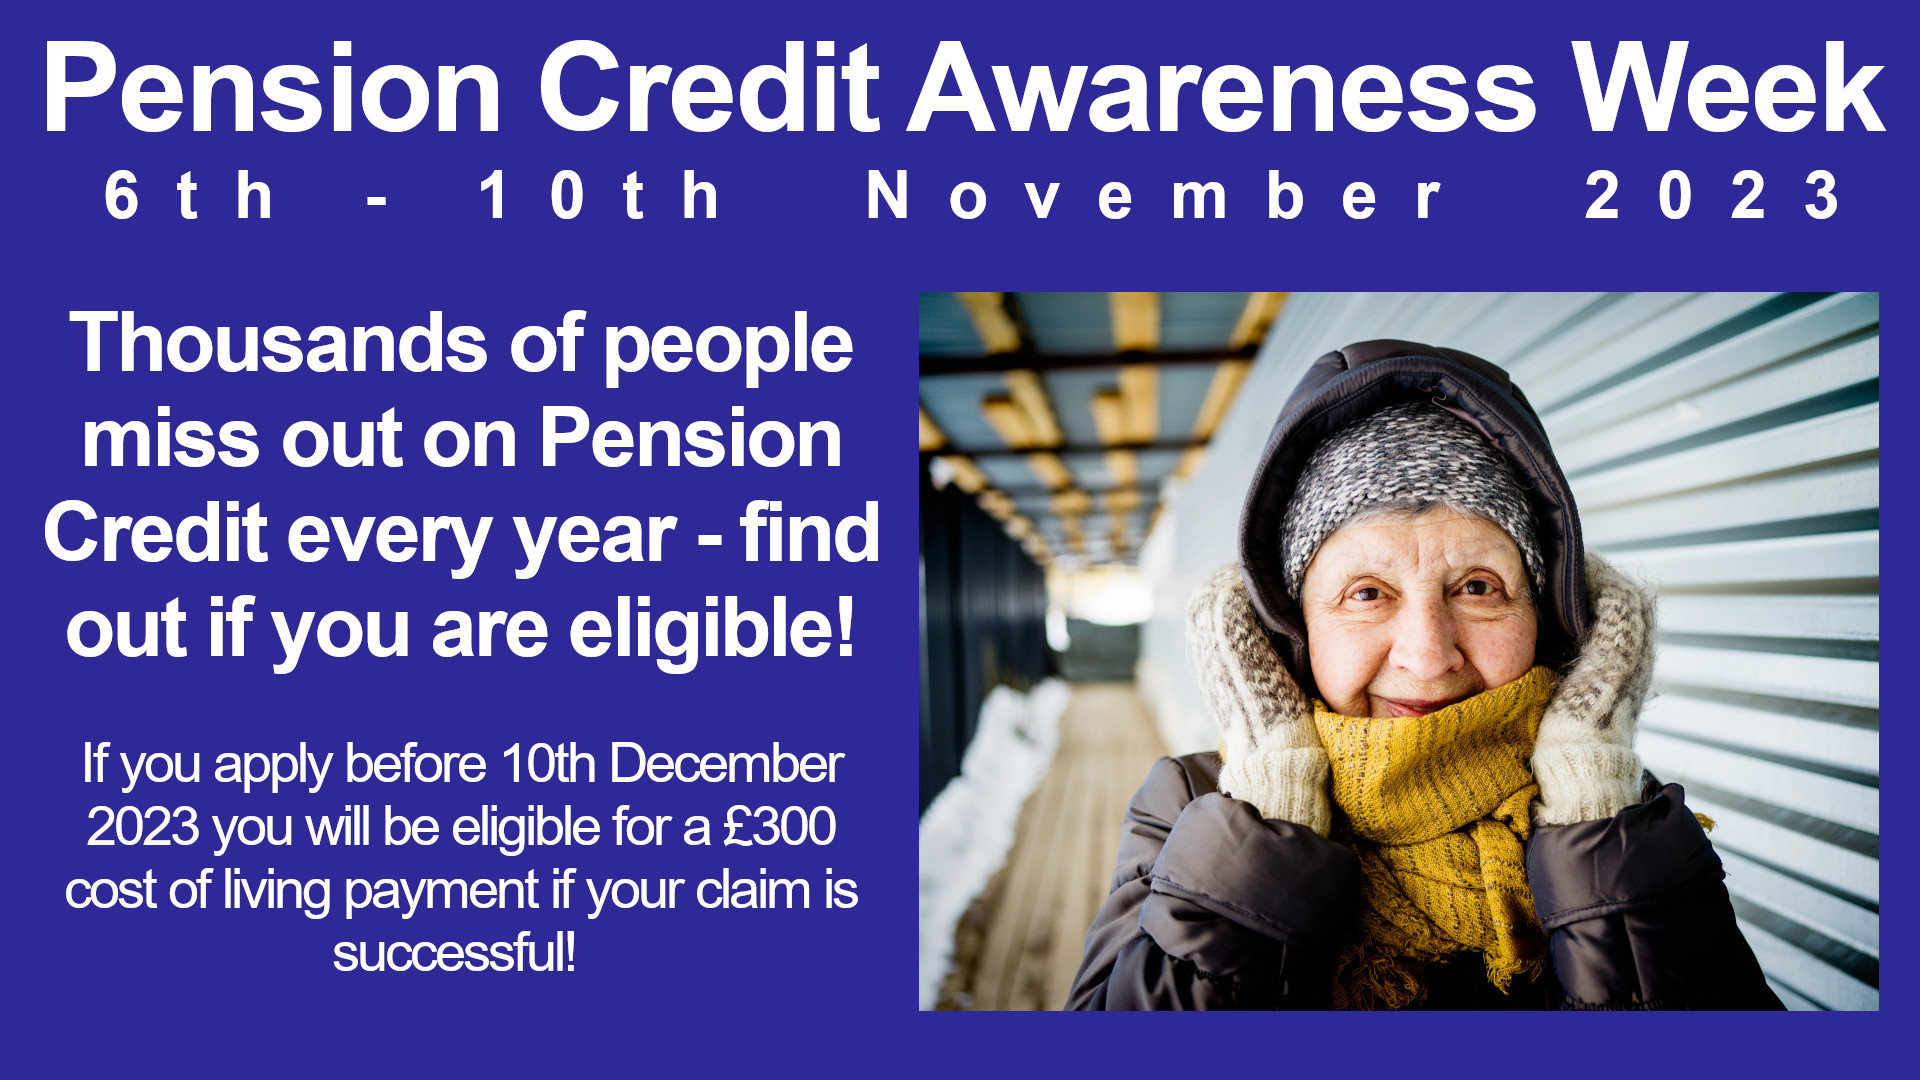 Photo of older person wrapped up warm with the statements: Pension Credit Aeareness Week 6th - 10th November 2023. Thousands of people miss out on Pension Credit every year - find out if you are eligible! If you apply before 10th December 2023 you will be eligible for a £300 cost of living payment if your claim is successful!